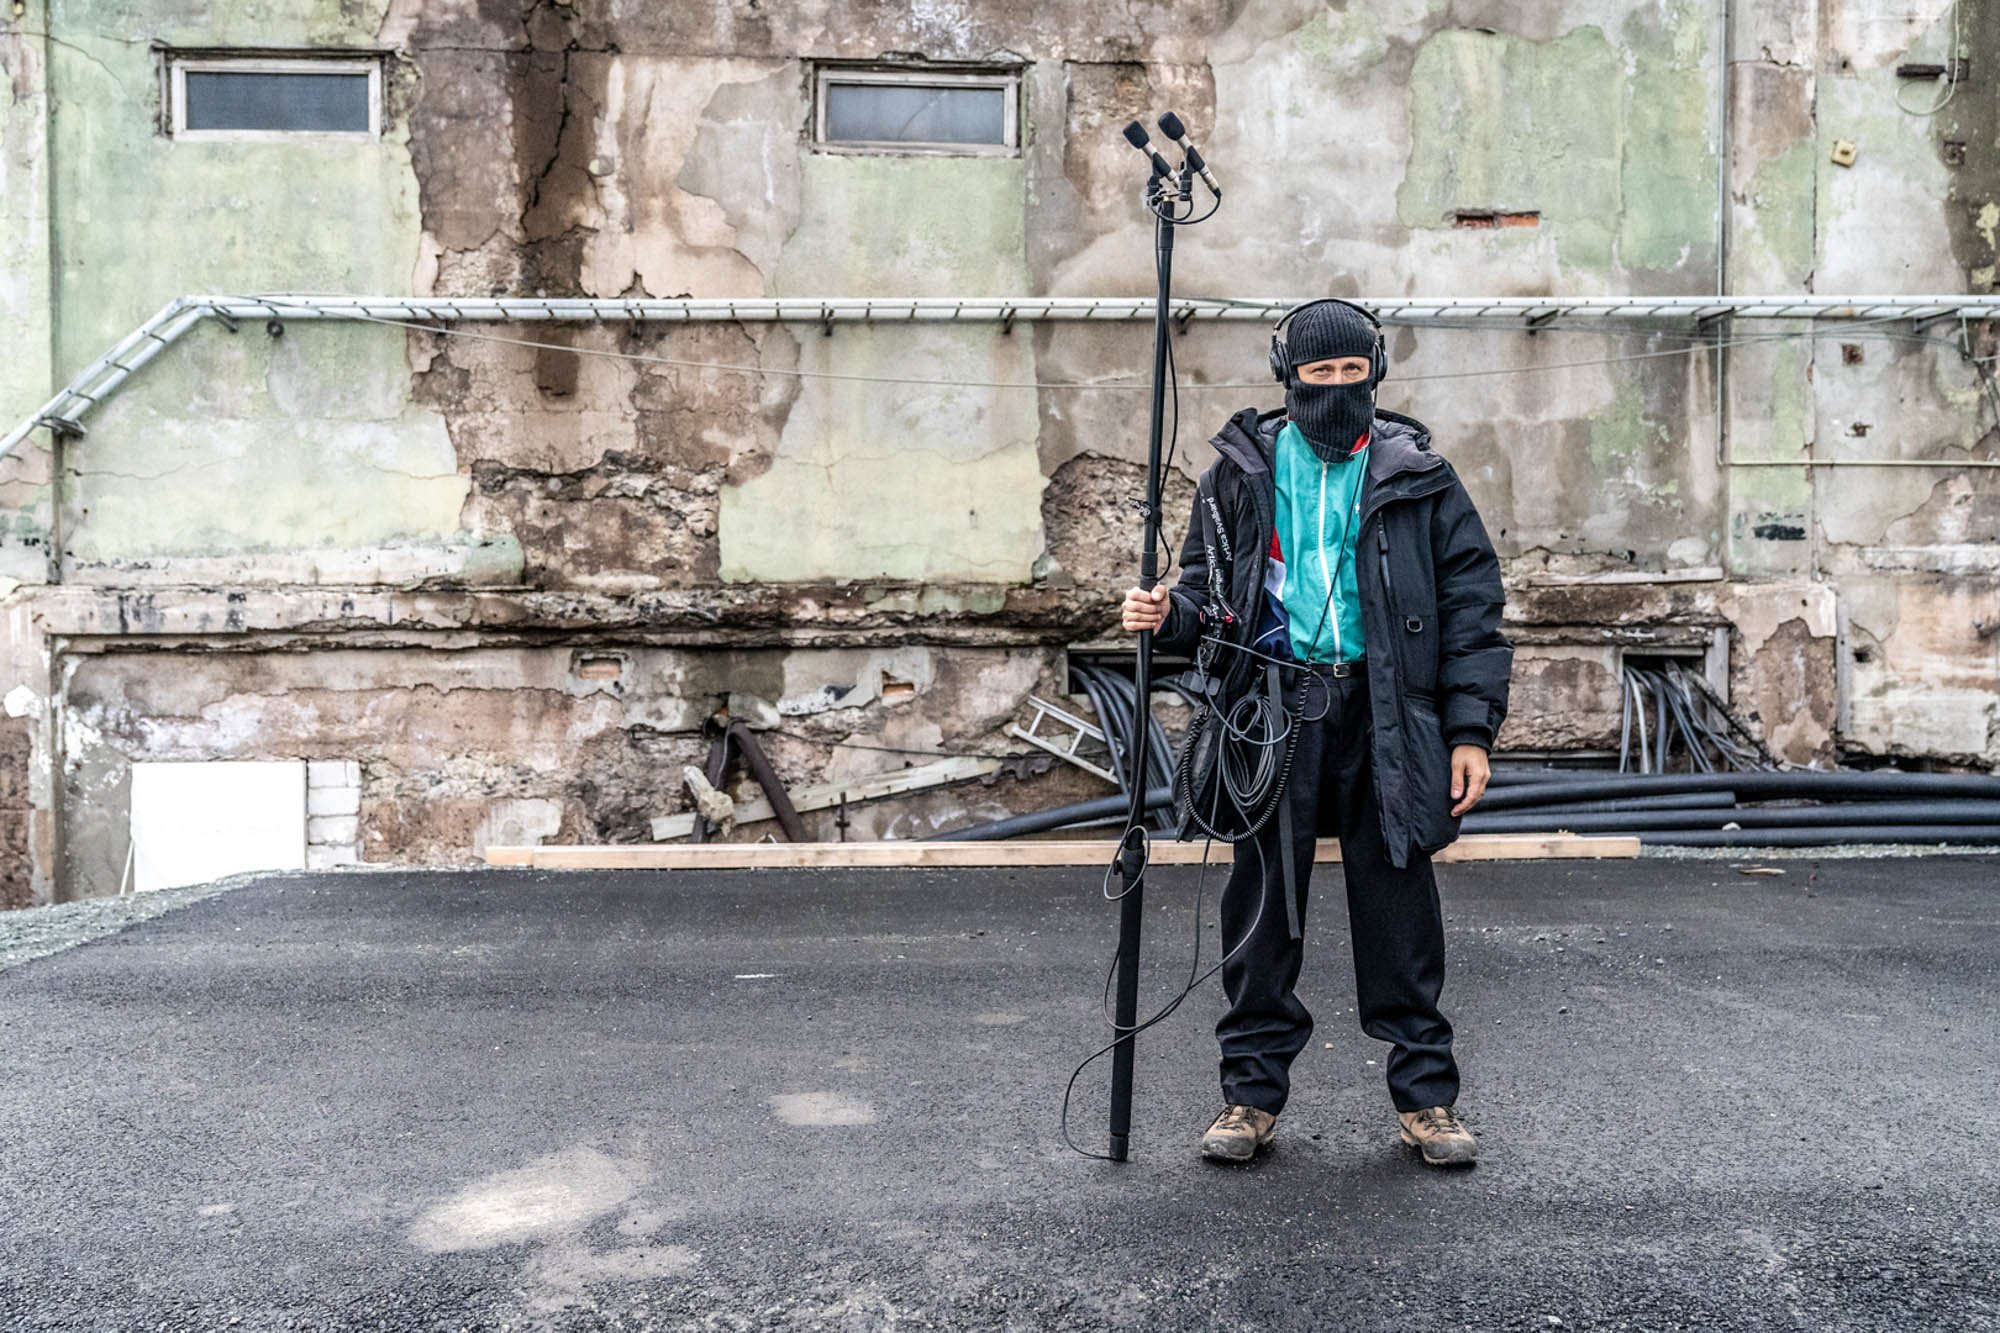  In september 2021 artist and composer Ignas Krunglevičius presented his sonic installation Hard Body Dyspraxia inside a disused power plant in Longyearbyen. Photo: Tom Warner 